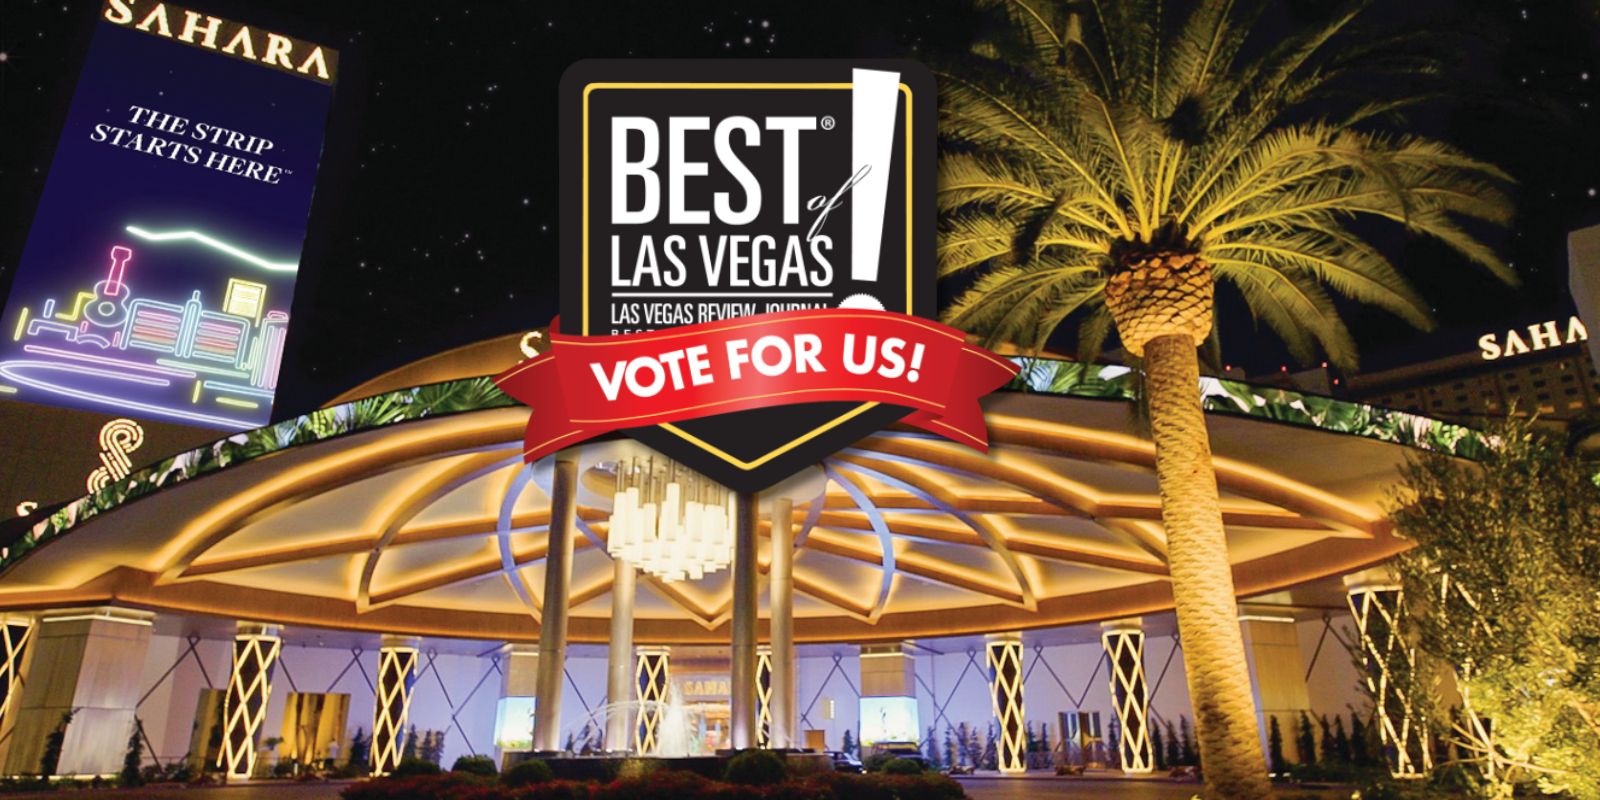 Exterior shot of the SAHARA Las Vegas building with the Vote for Us Best of Las Vegas logo over it